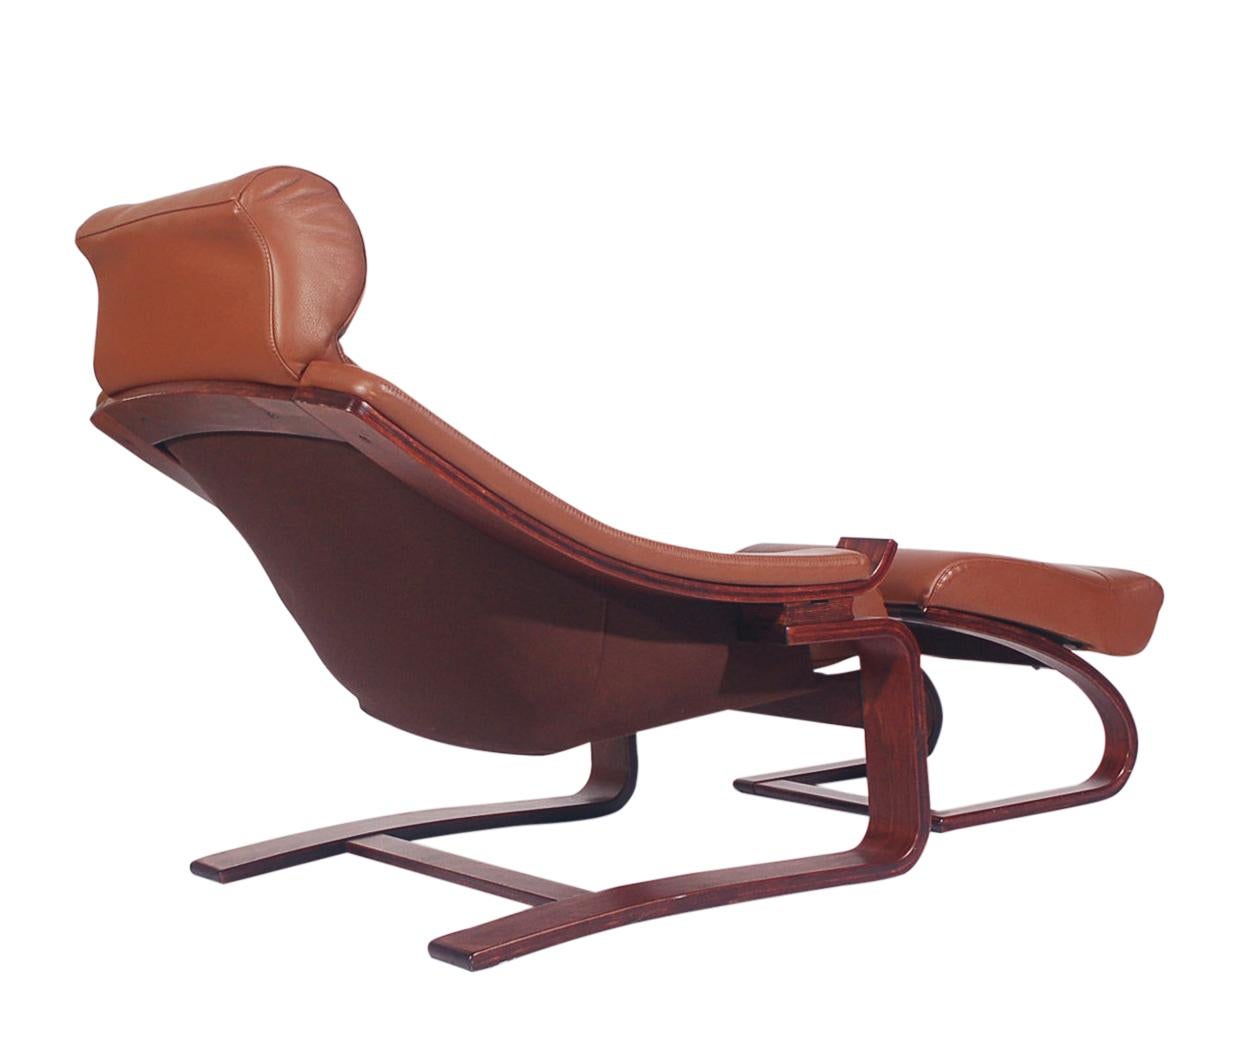 Norwegian Mid-Century Danish Modern Cantilevered Leather Lounge Chair with Foot Stool